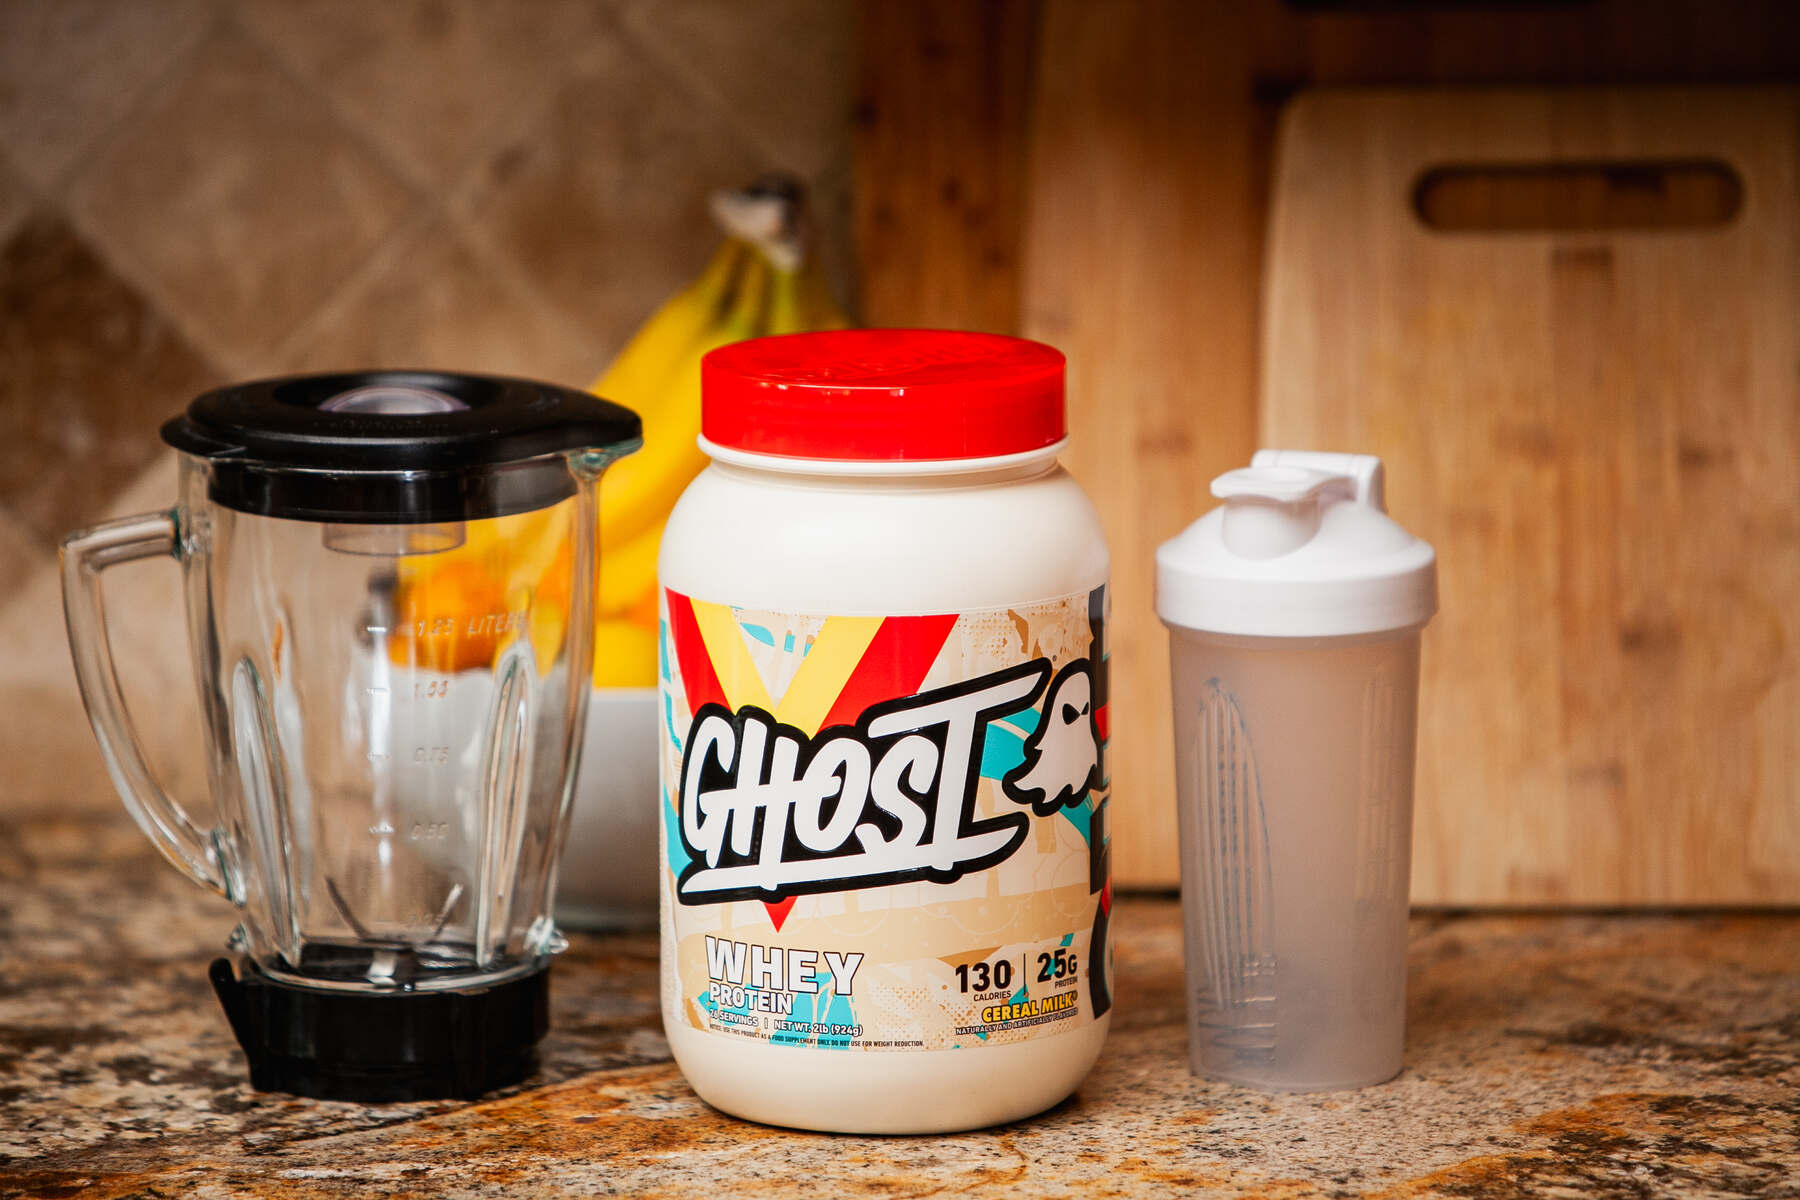 A protein powder jar, shaker bottle, and blender on a kitchen countertop